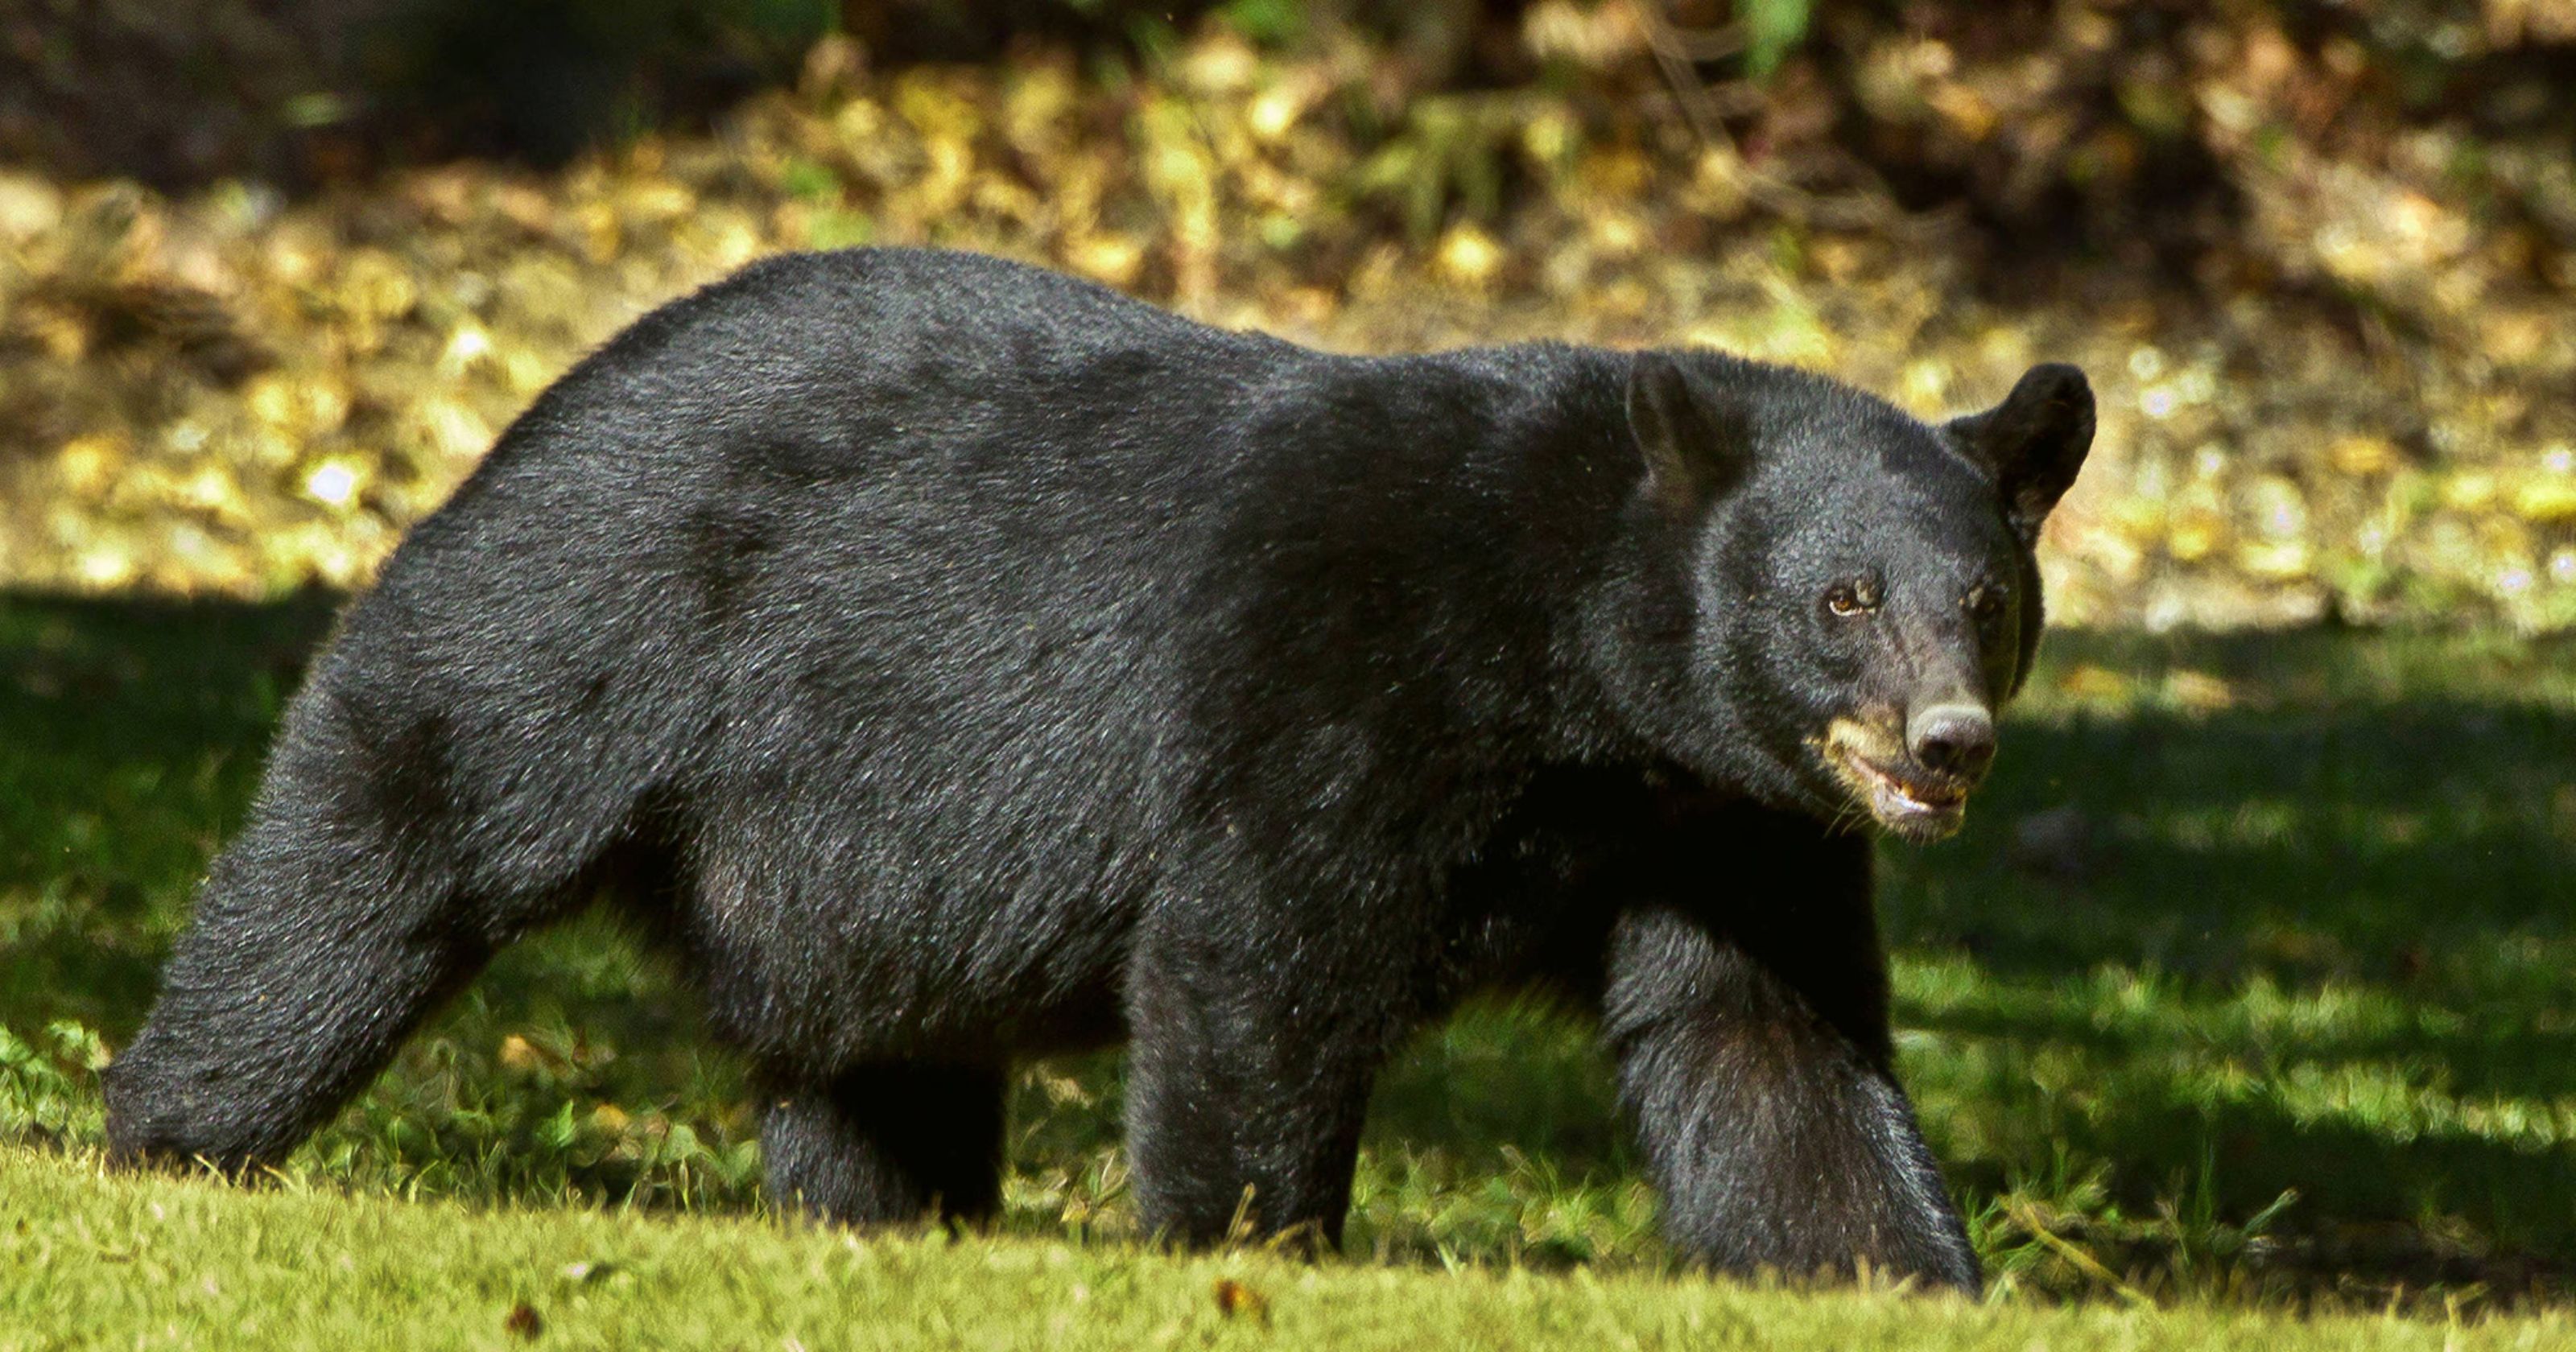 Bears in Mississippi: Bear suspected of attacking car